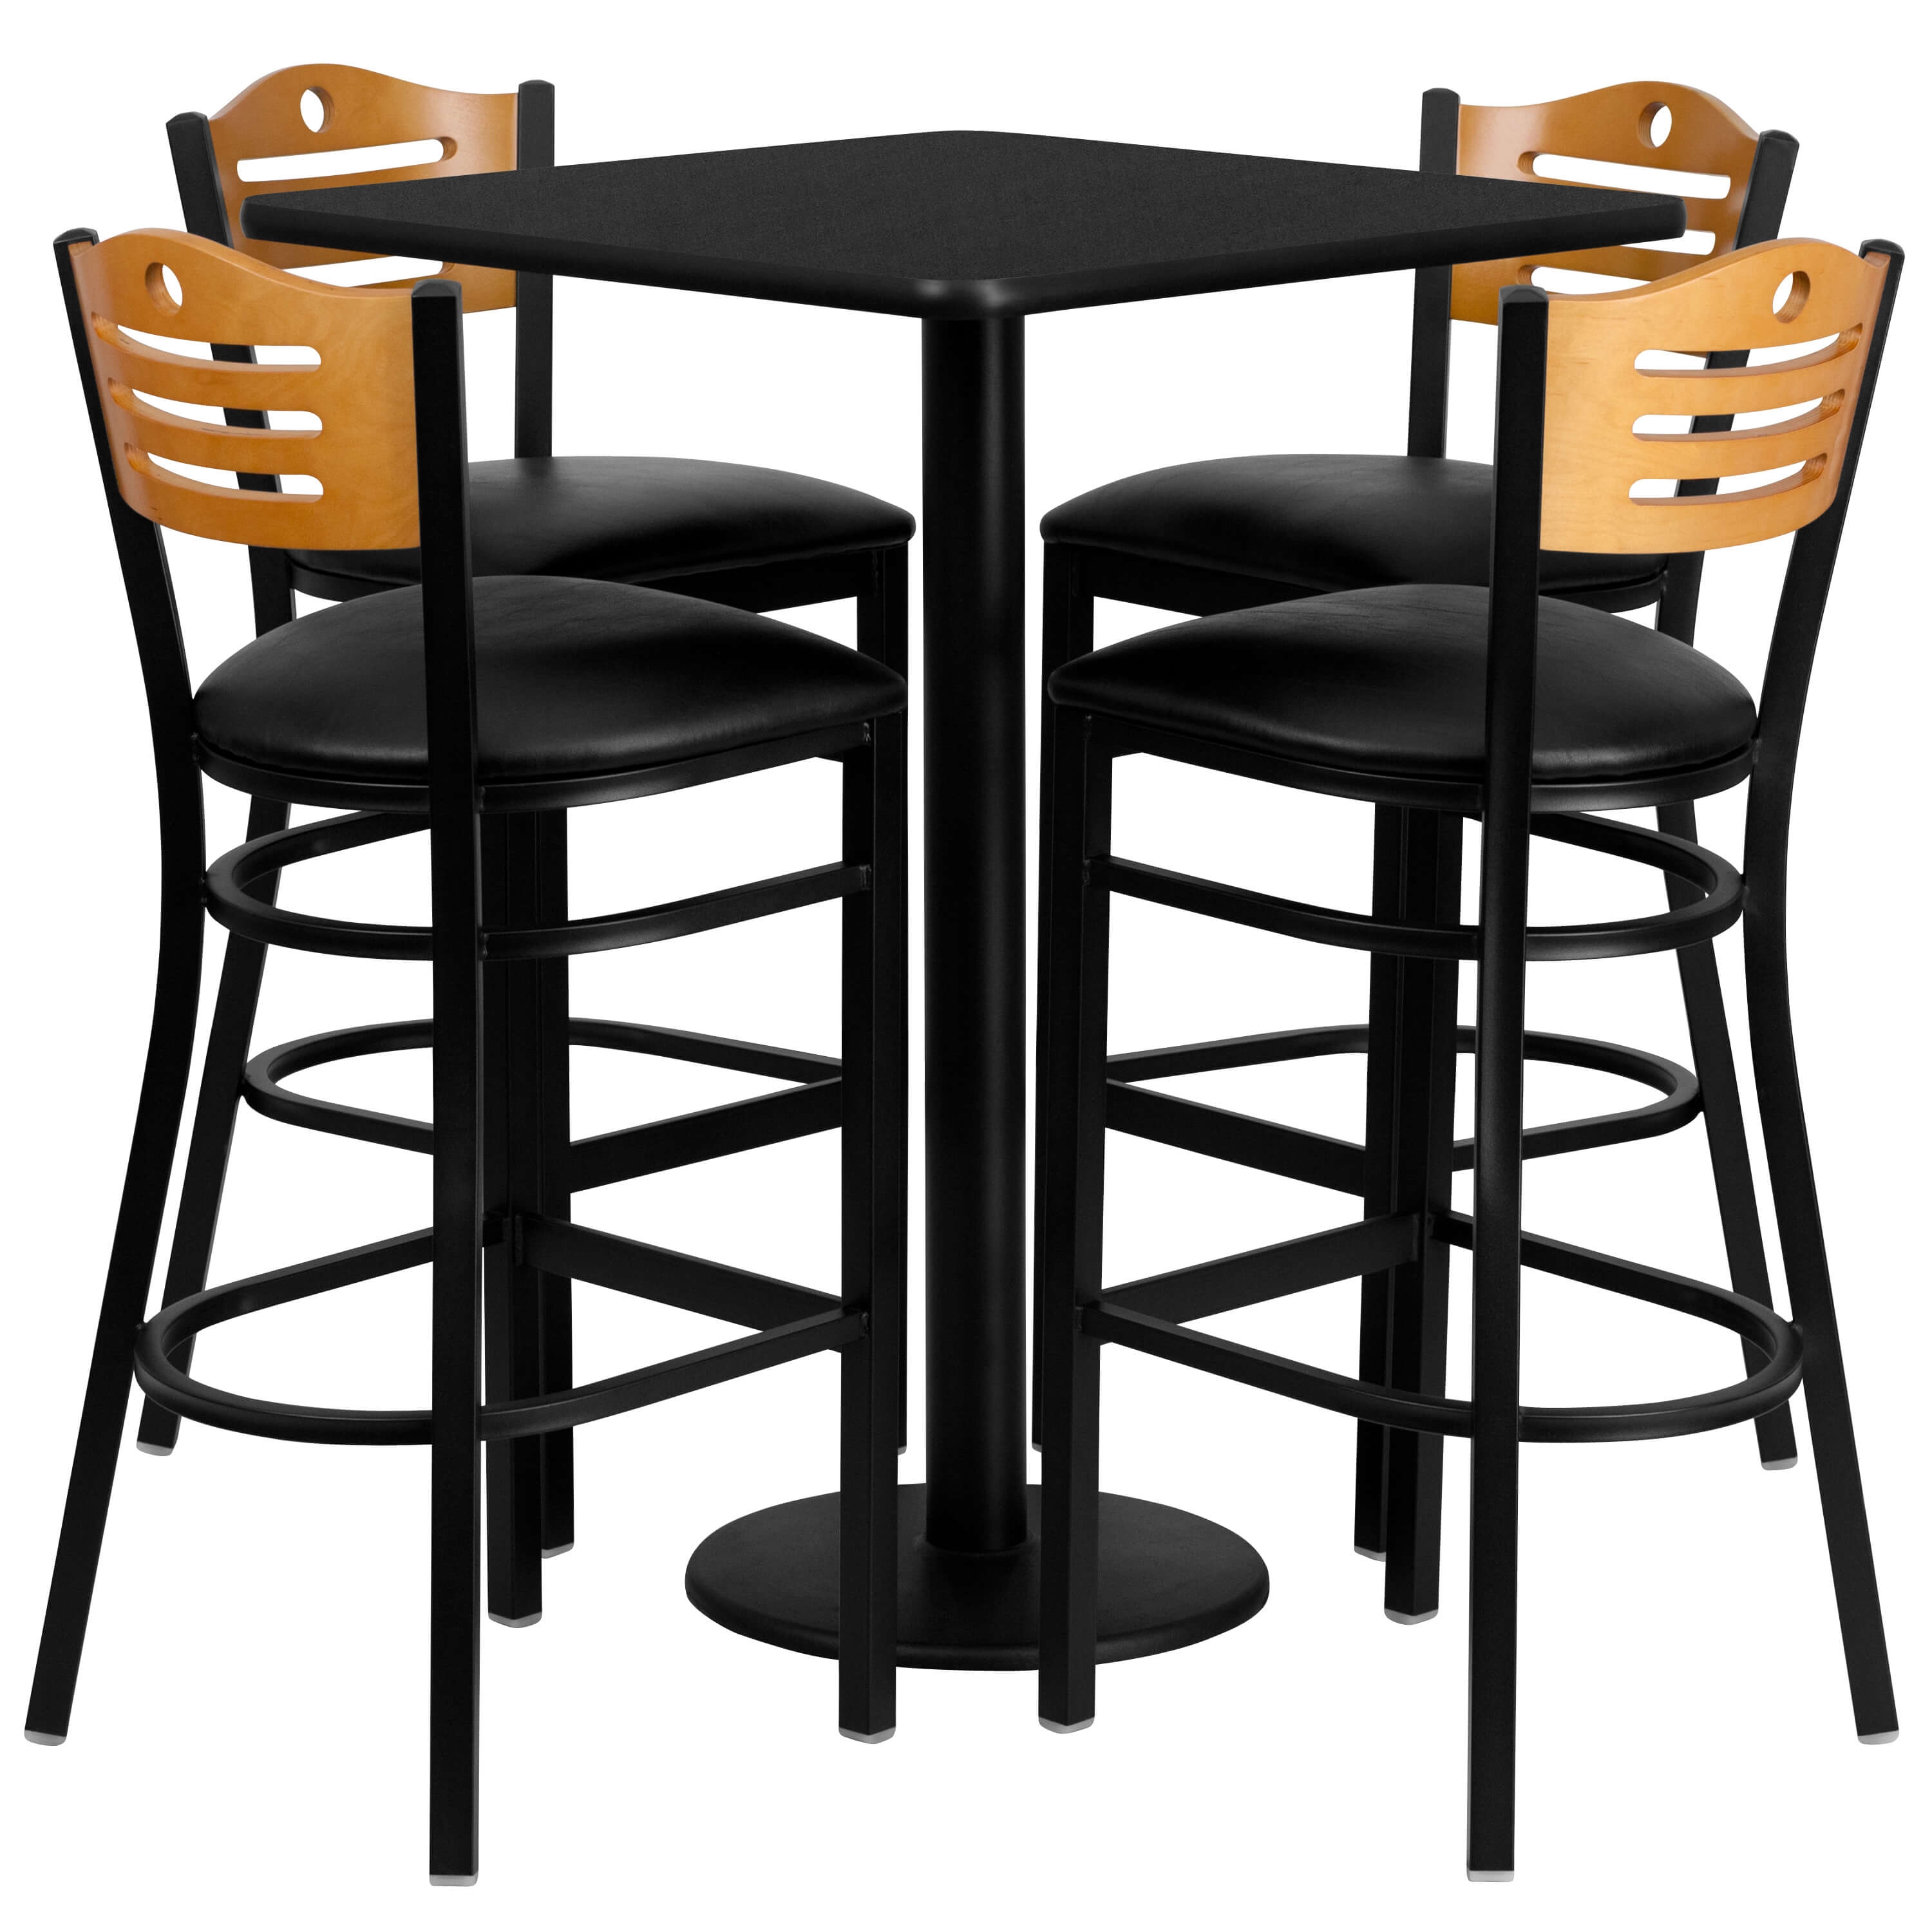 cafe-tables-and-chairs-30inch-pub-style-dining-set.jpg